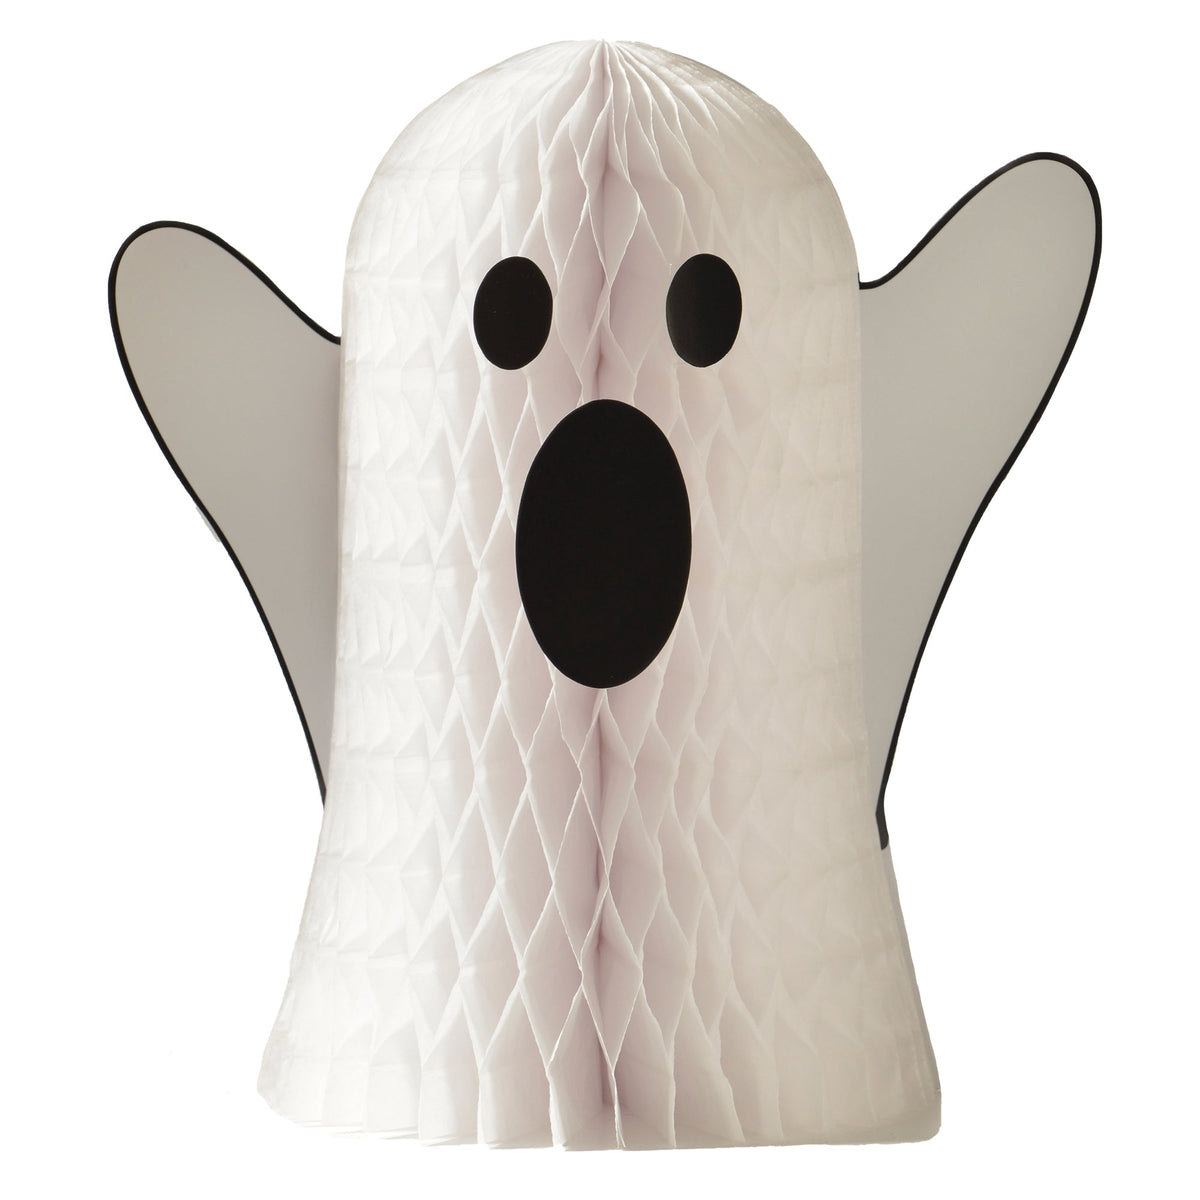 Family Friendly Ghost 13 1/2" x 12 5/8" Honeycomb Centerpiece